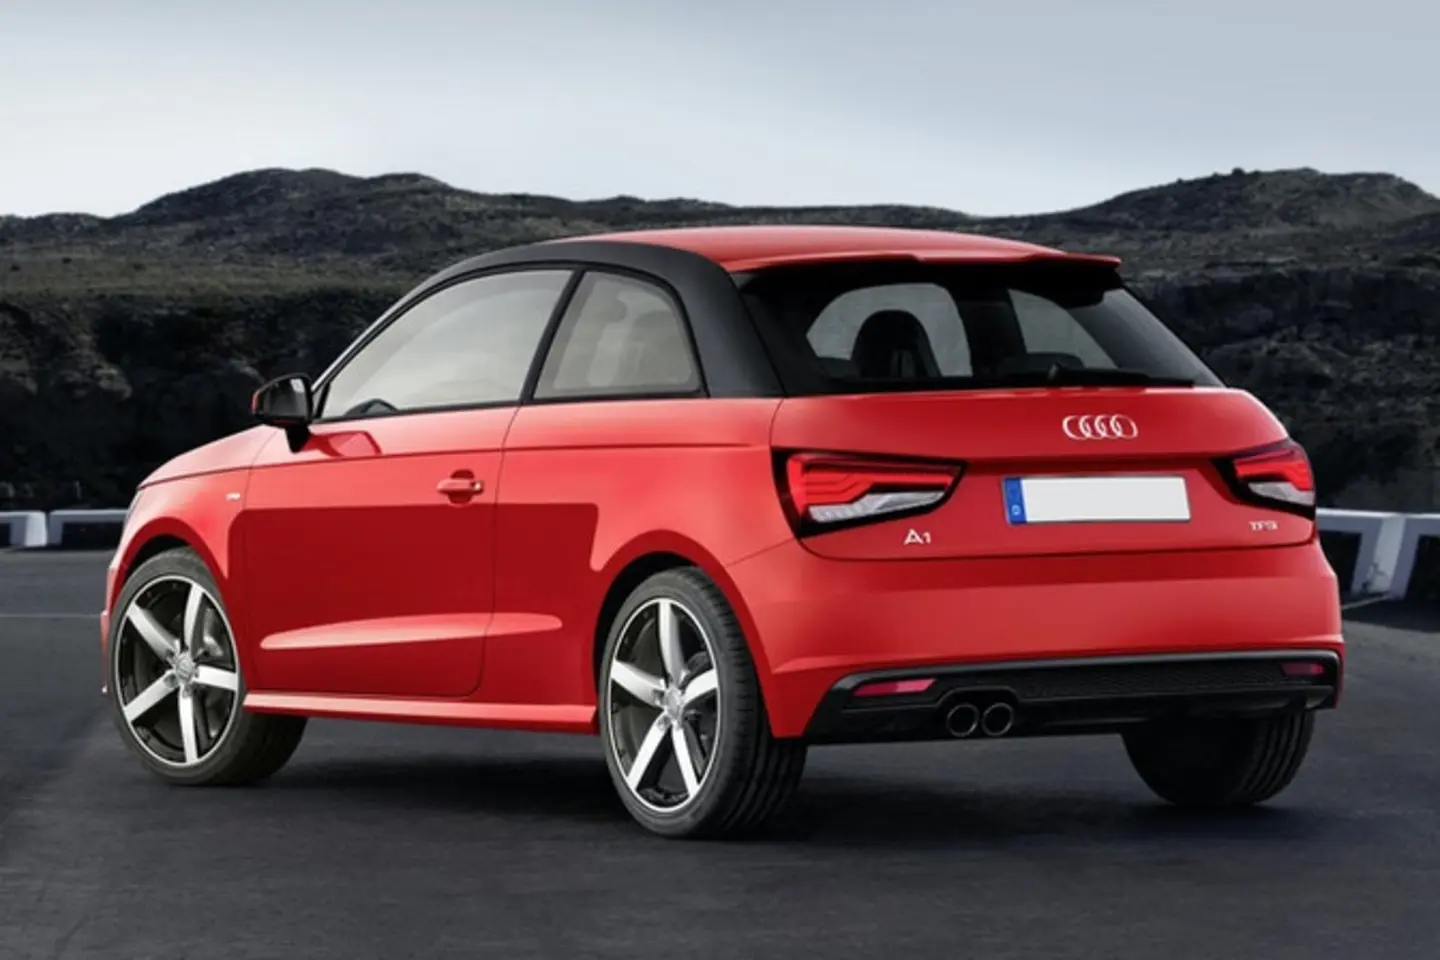 The rear exterior of a red Audi A1